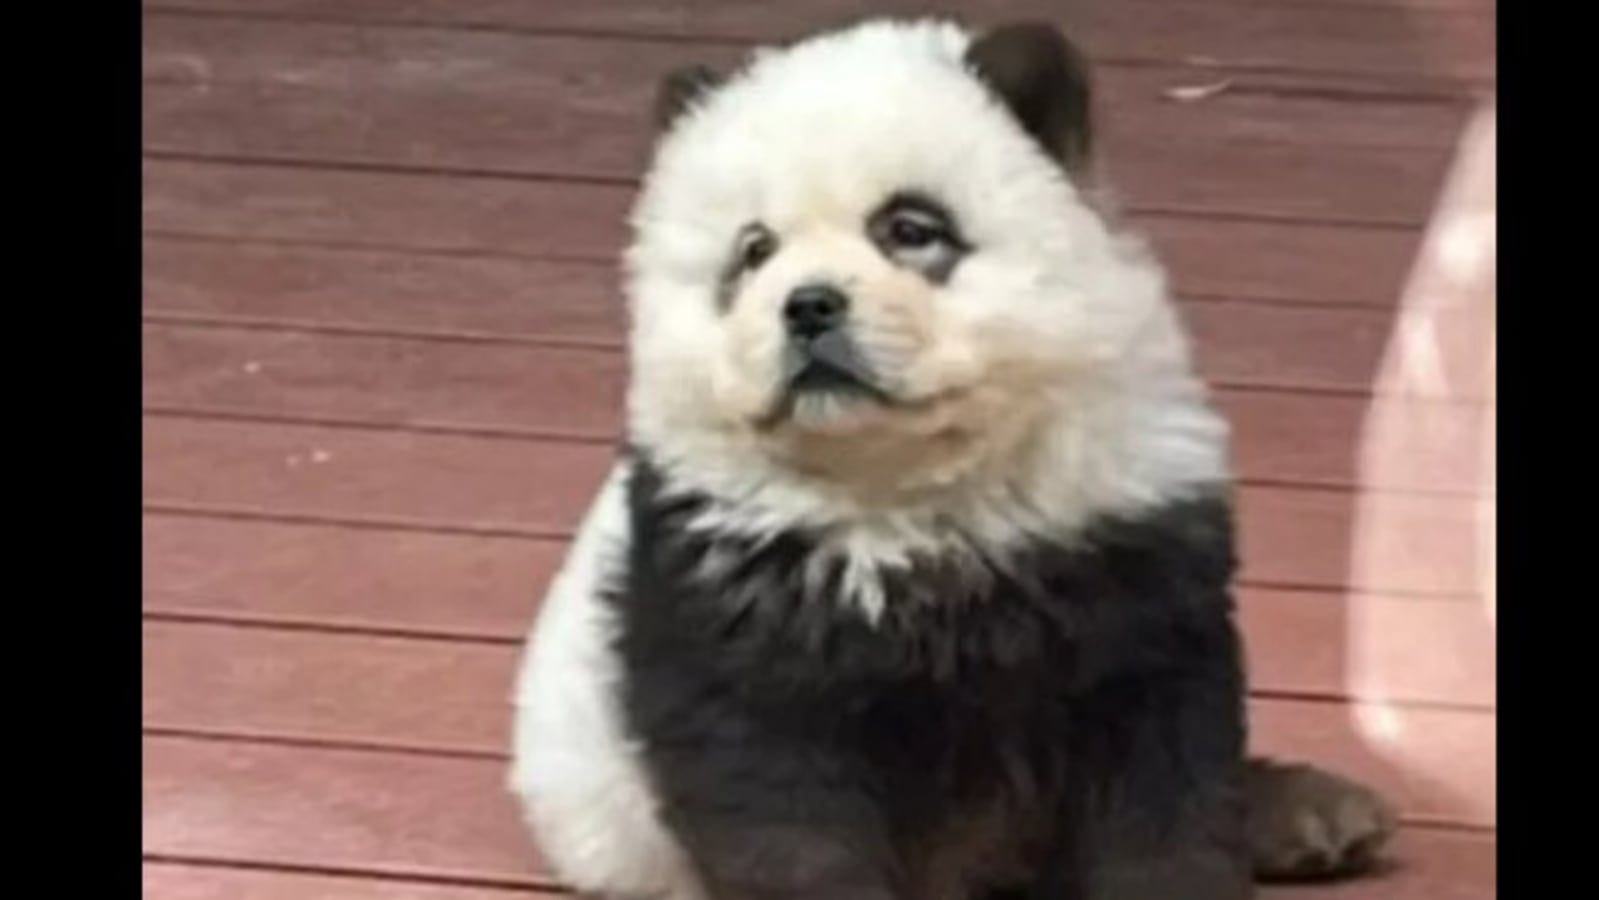 ‘Panda dog’: China zoo paints chow chow dogs to look like pandas, fools thousands of visitors